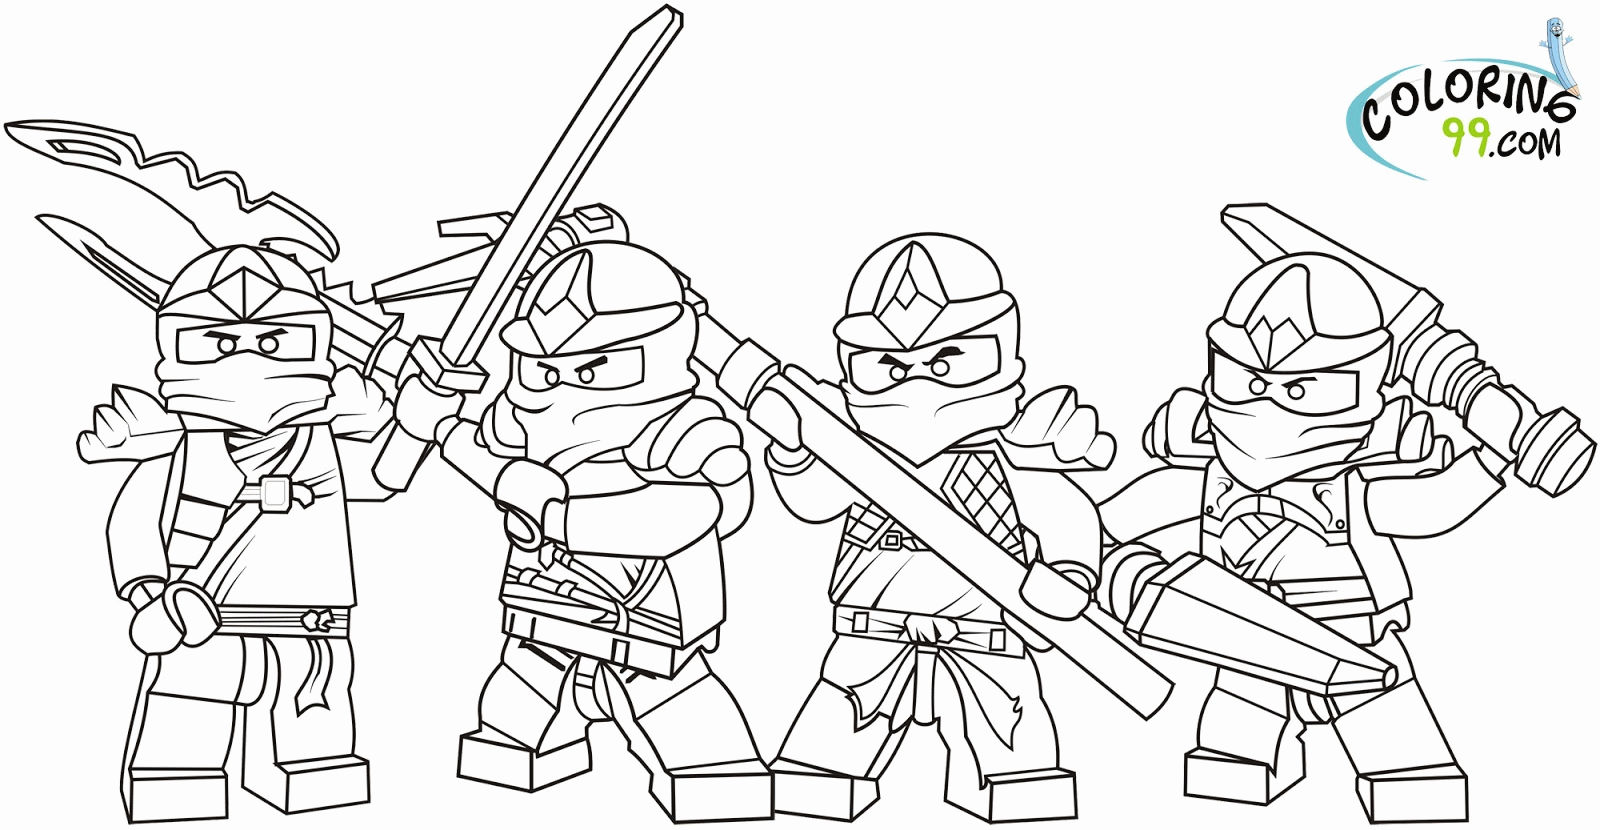 Lego Ninjago Coloring Pages Kai Zx - High Quality Coloring Pages